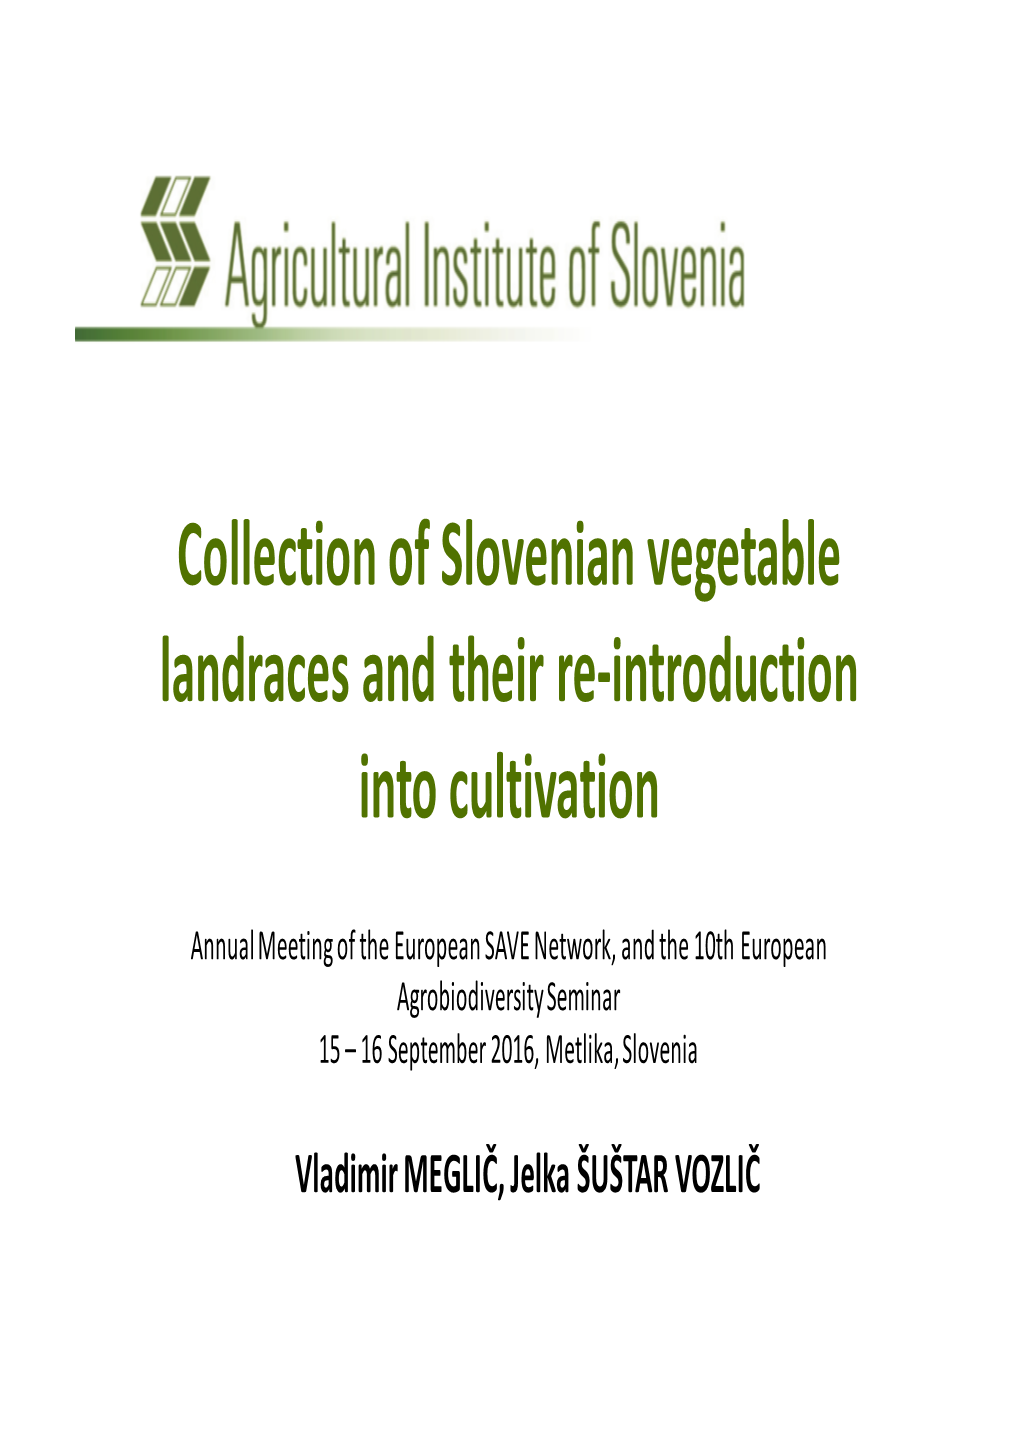 Collection of Slovenian Vegetable Landraces and Their Re-Introduction Into Cultivation